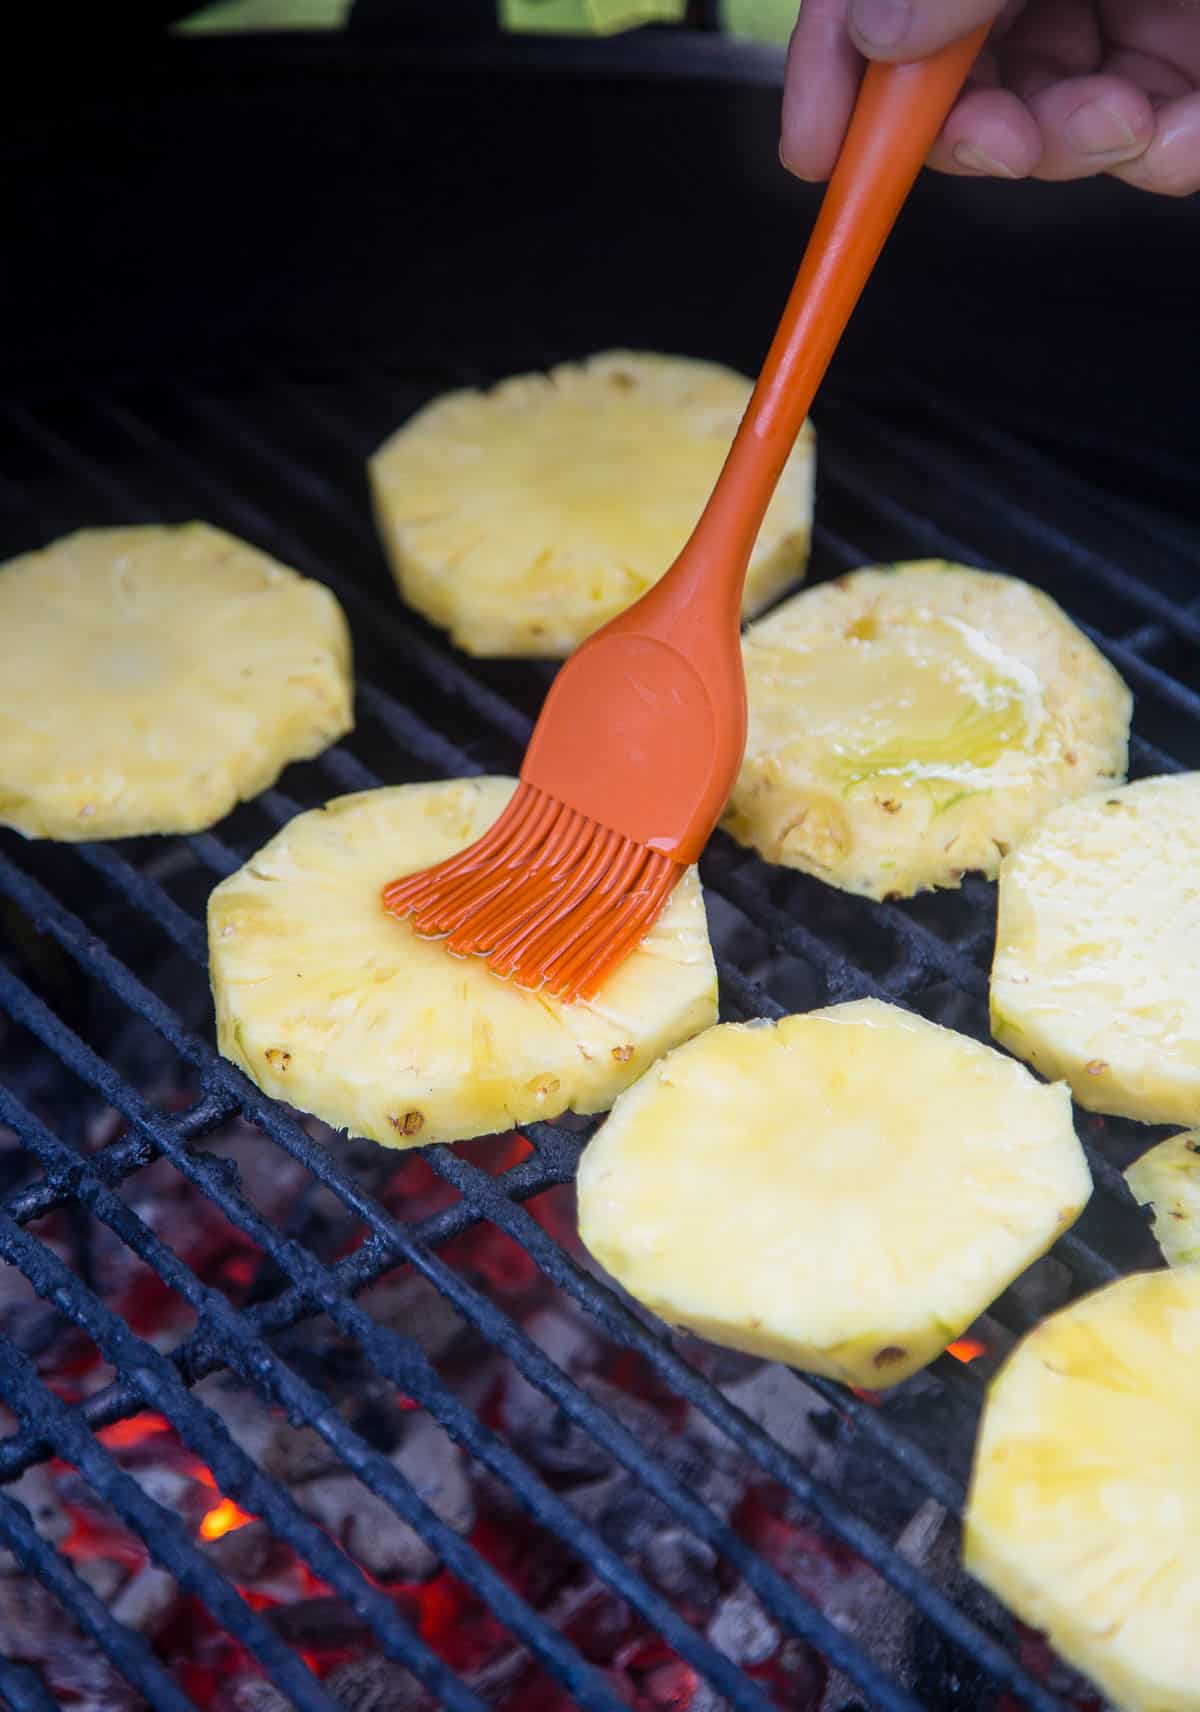 Grilling slices of pineapple on a charcoal grill